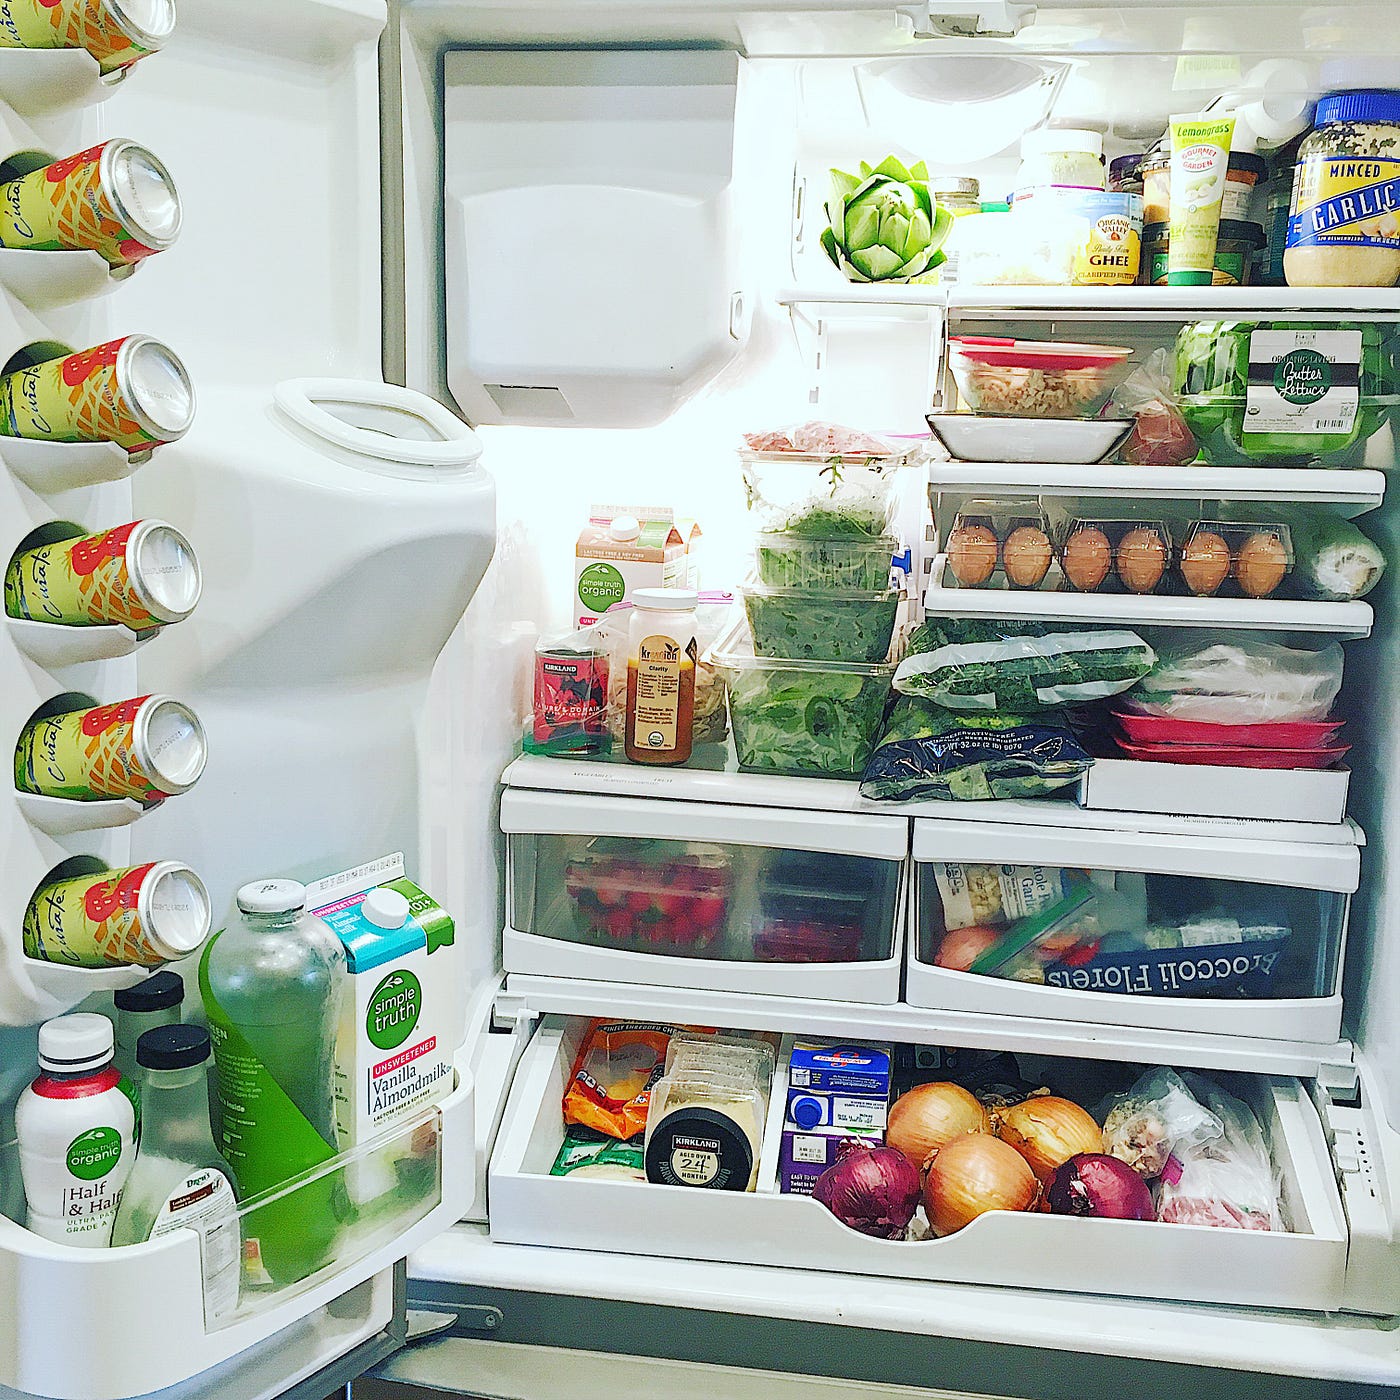 Now, Organise Your Refrigerator Like A Pro With These Containers - 5 Options